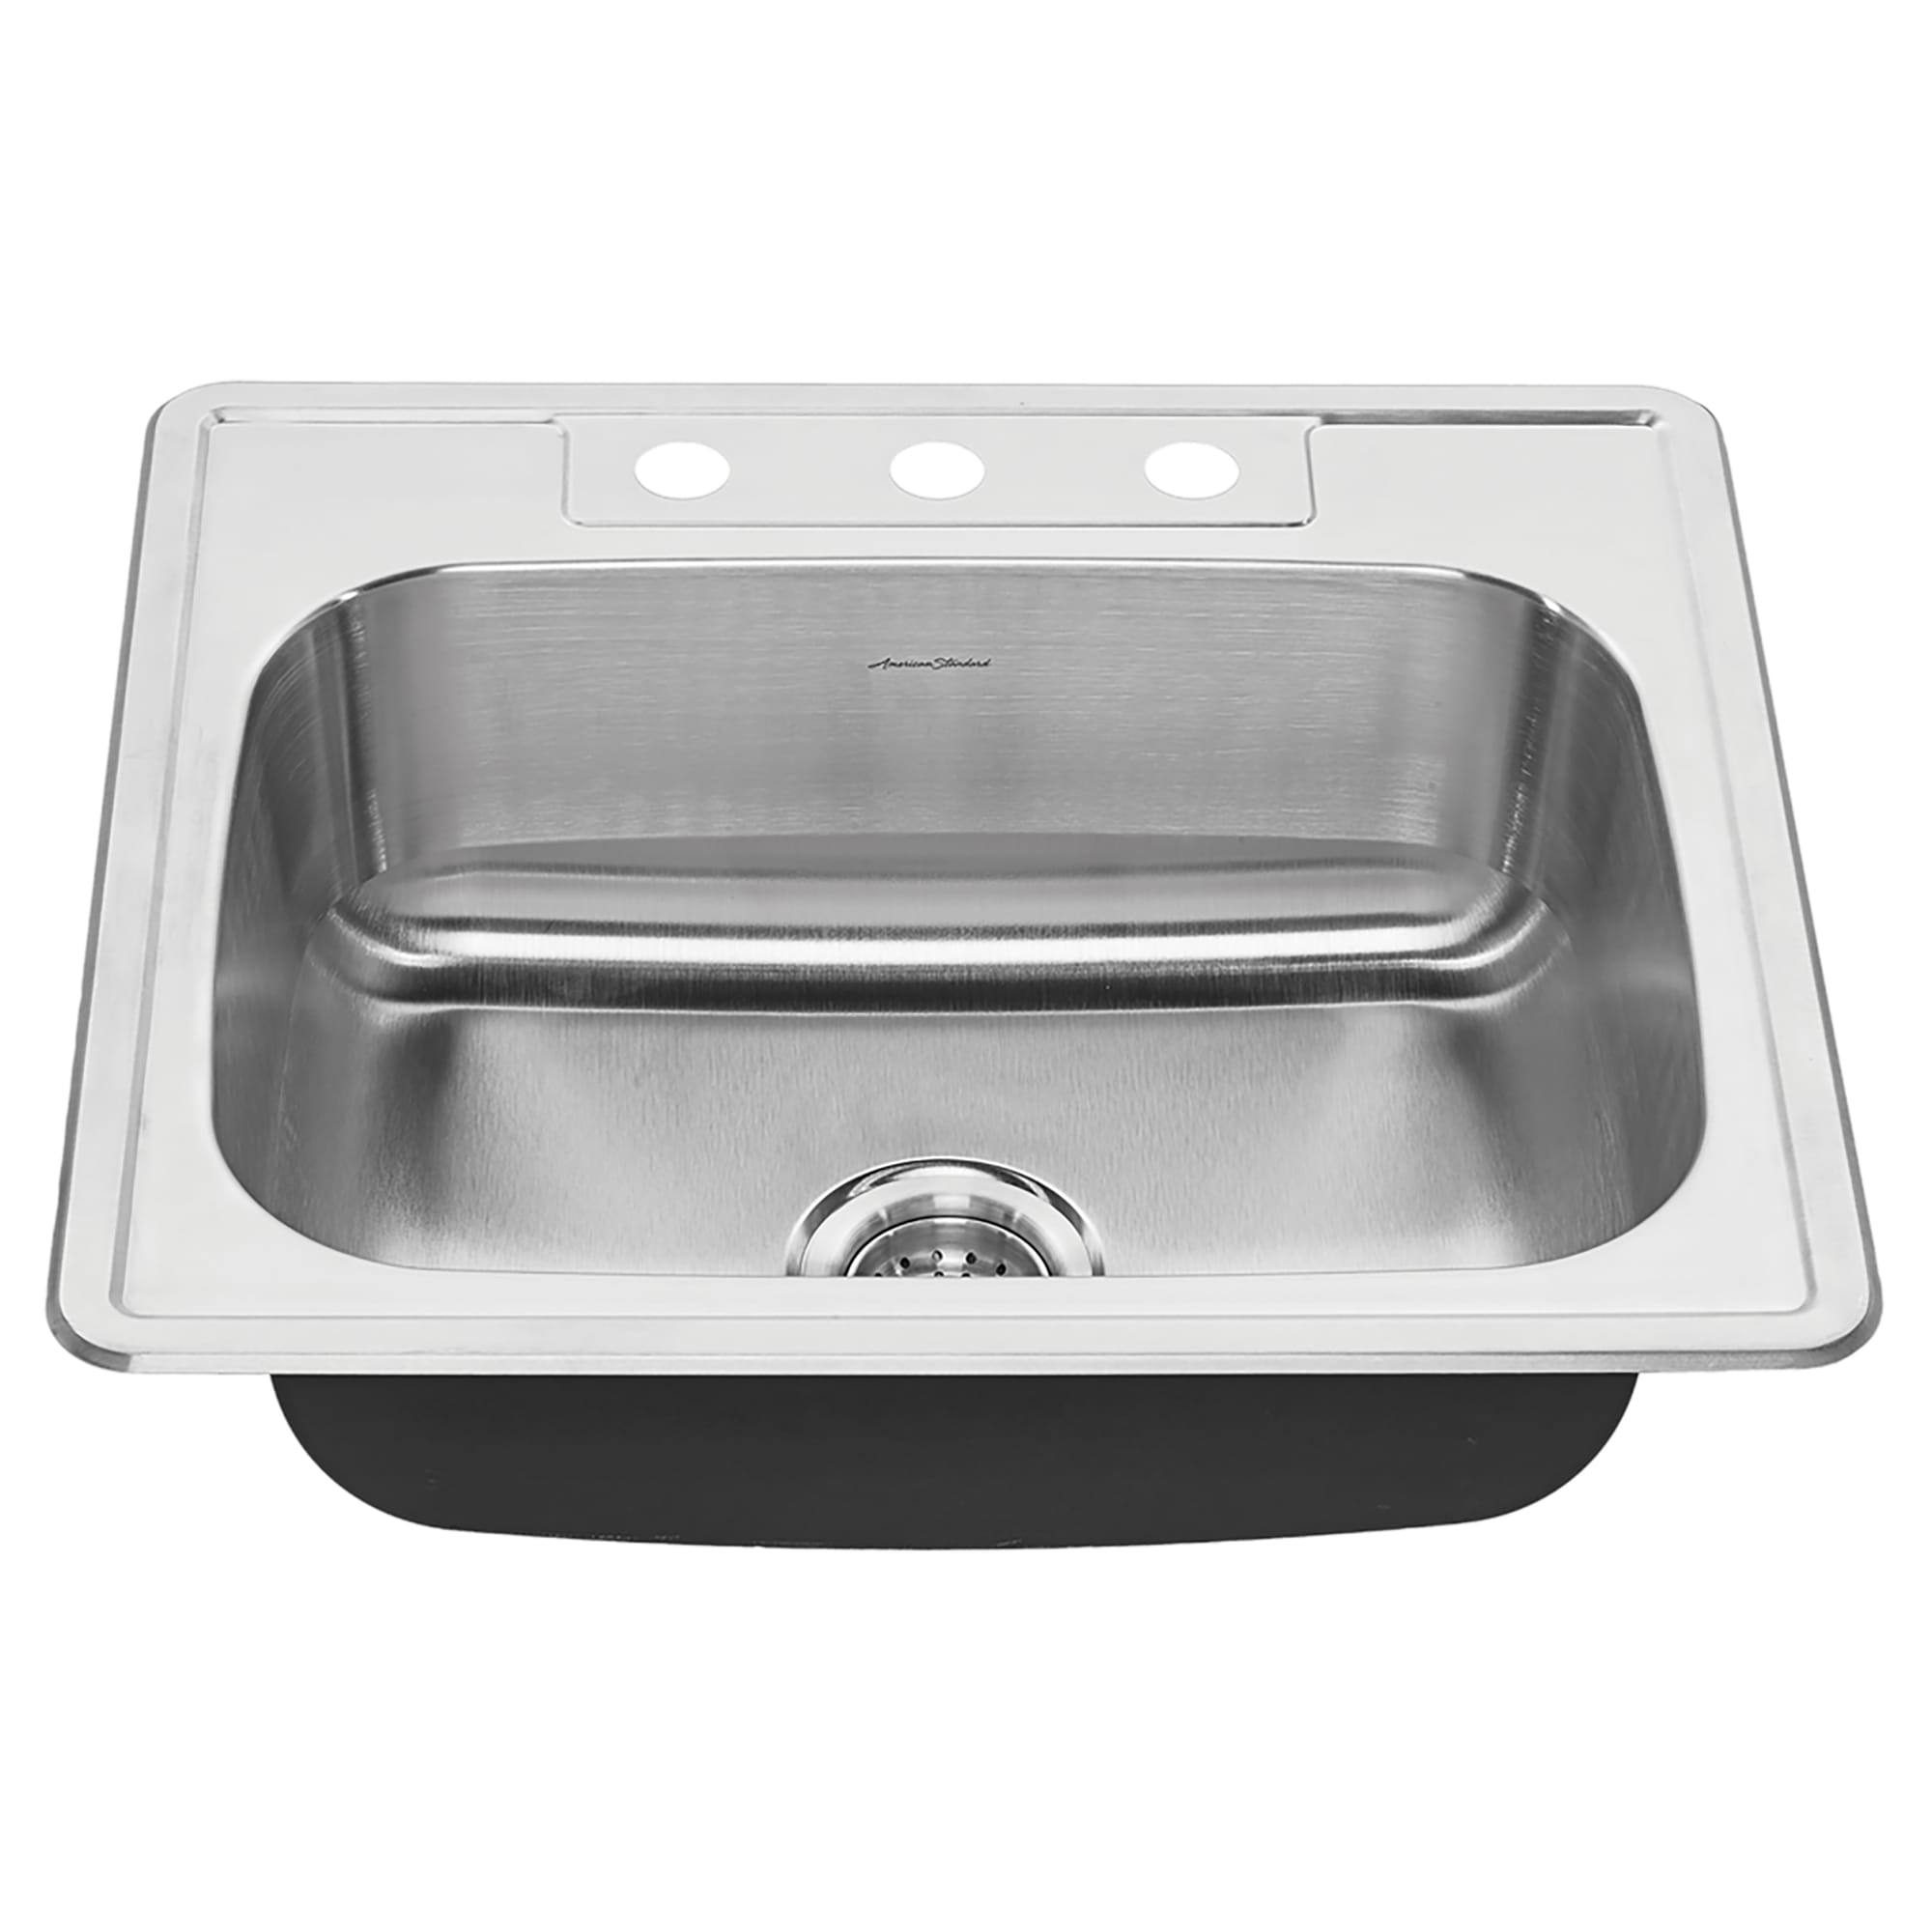 Colony® 25 x 22-Inch Stainless Steel 3-Hole Top Mount Single-Bowl ADA Kitchen Sink